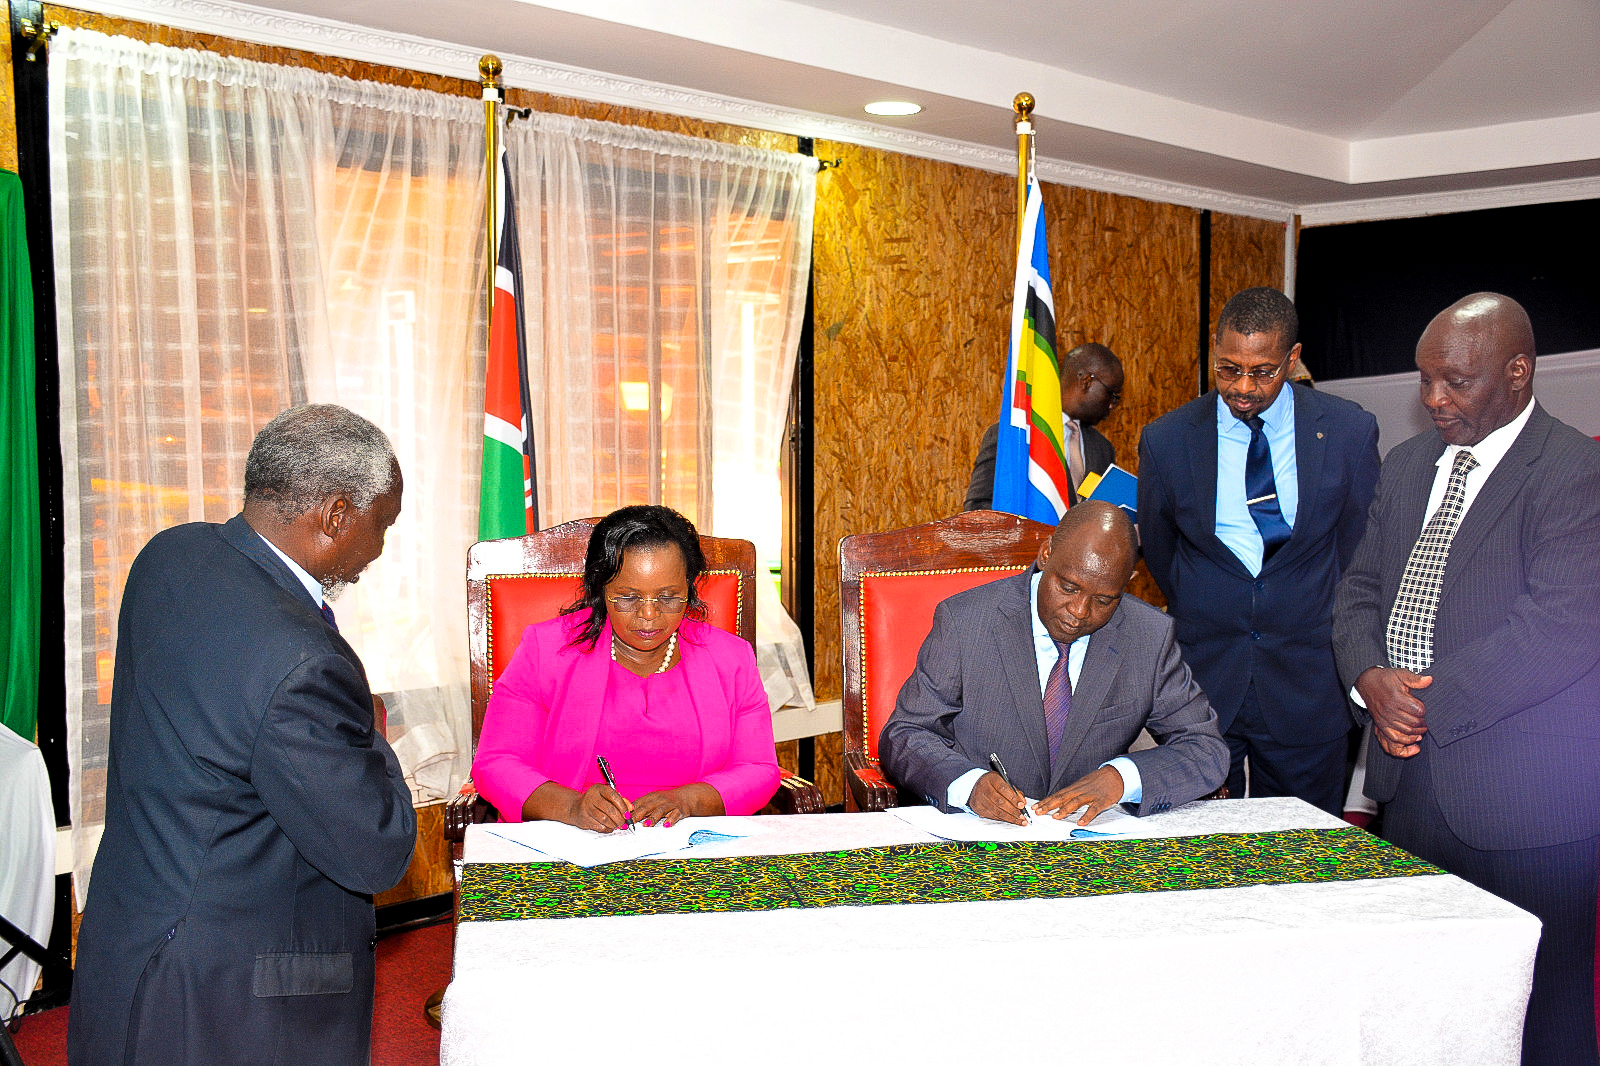 The Cabinet Secretary, Hon. Peninah Malonza, signing the performance contract for the financial year 2023/2024 with the Principal Secretary State Department for Tourism, John Ololtuaa.